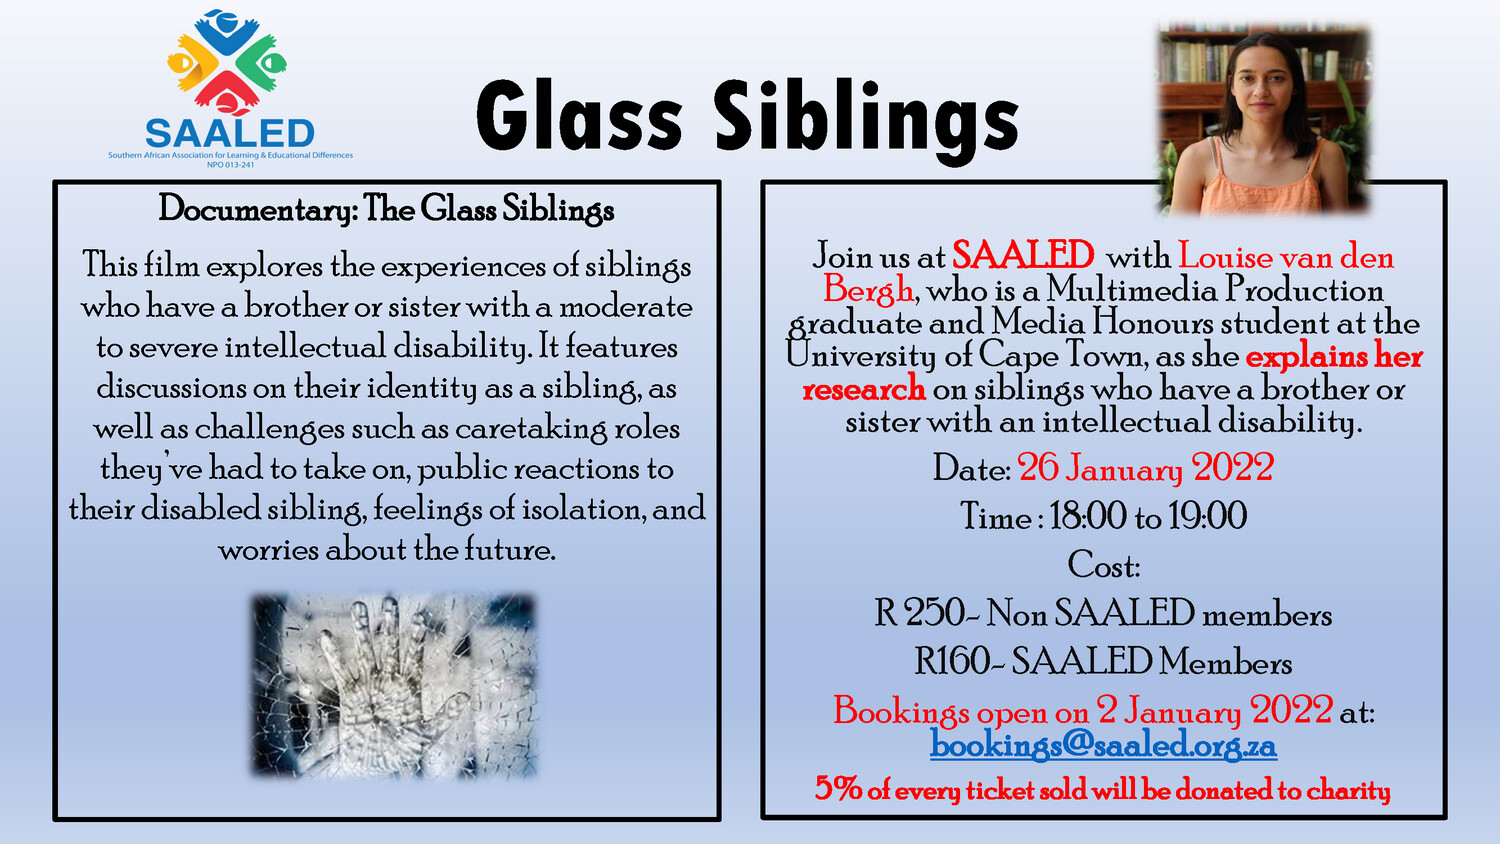 Glass Siblings - 26 January 2022 via Microsoft Teams from 18h00 to 19h30